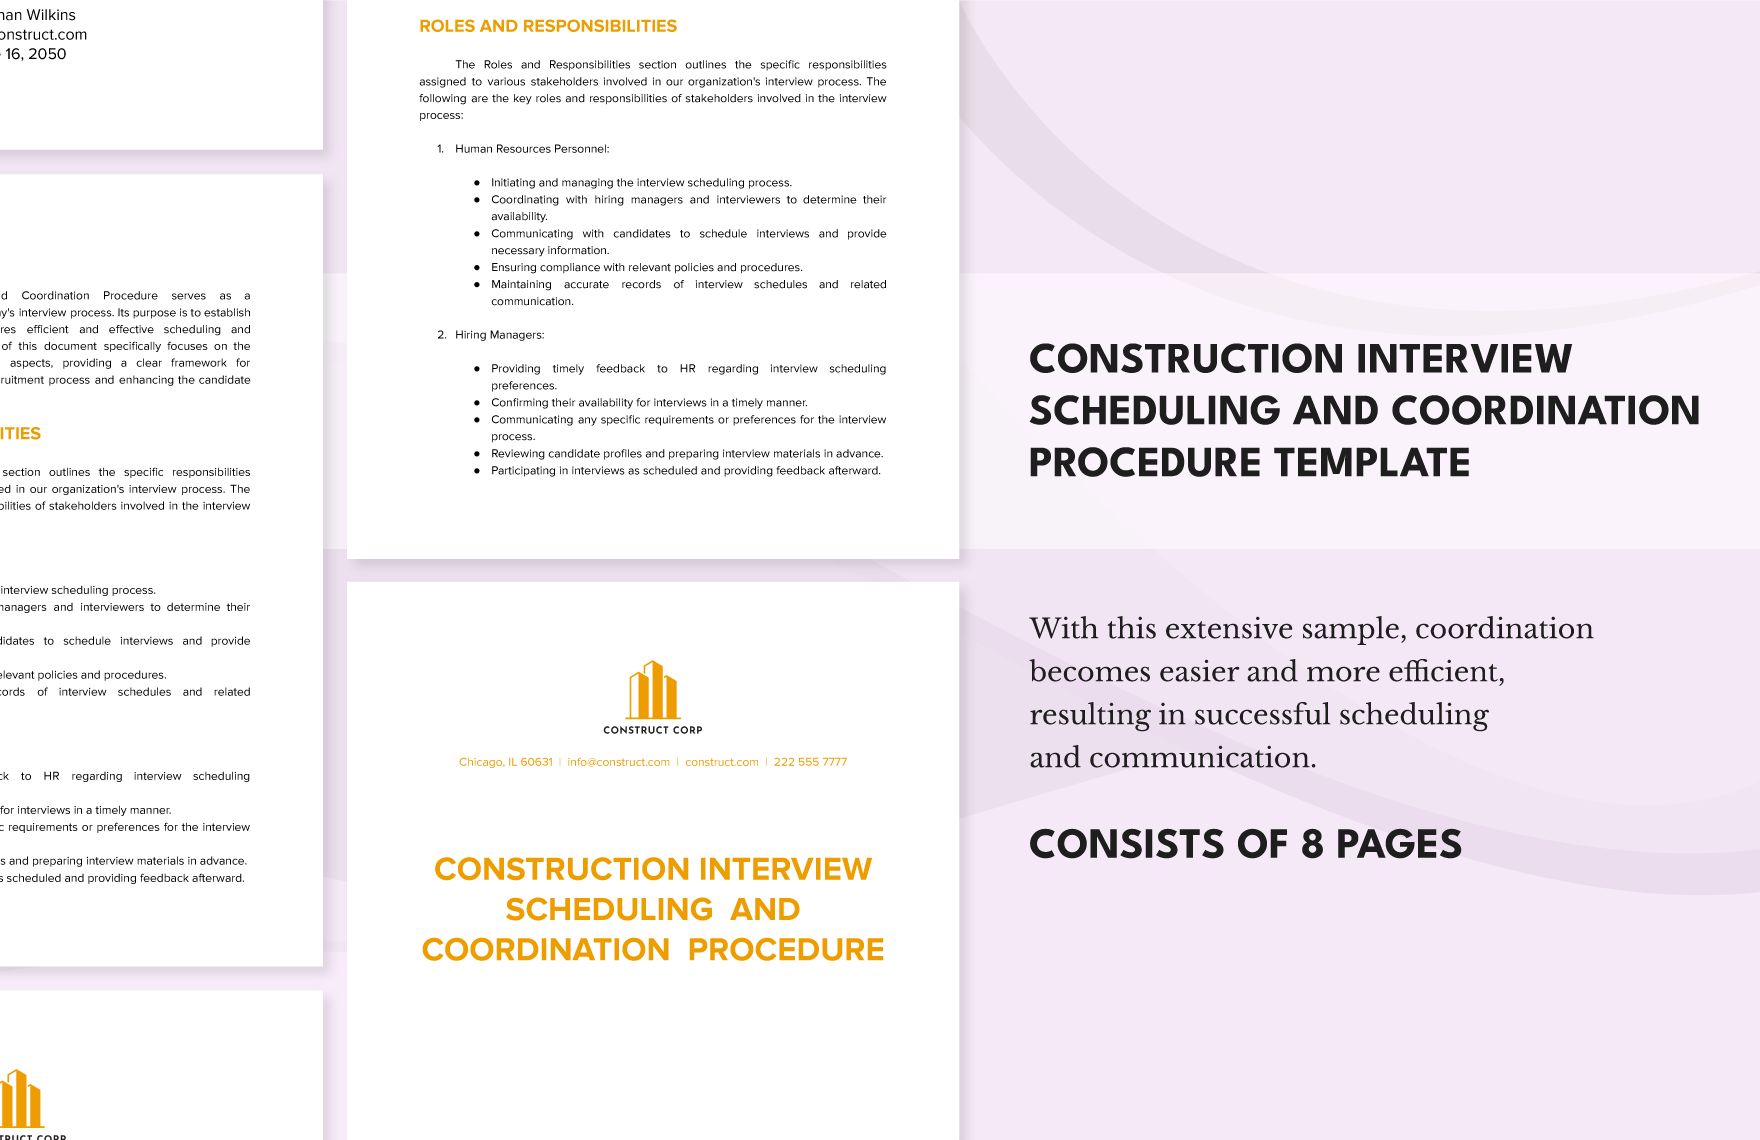 Construction Interview Scheduling and Coordination Procedure Template